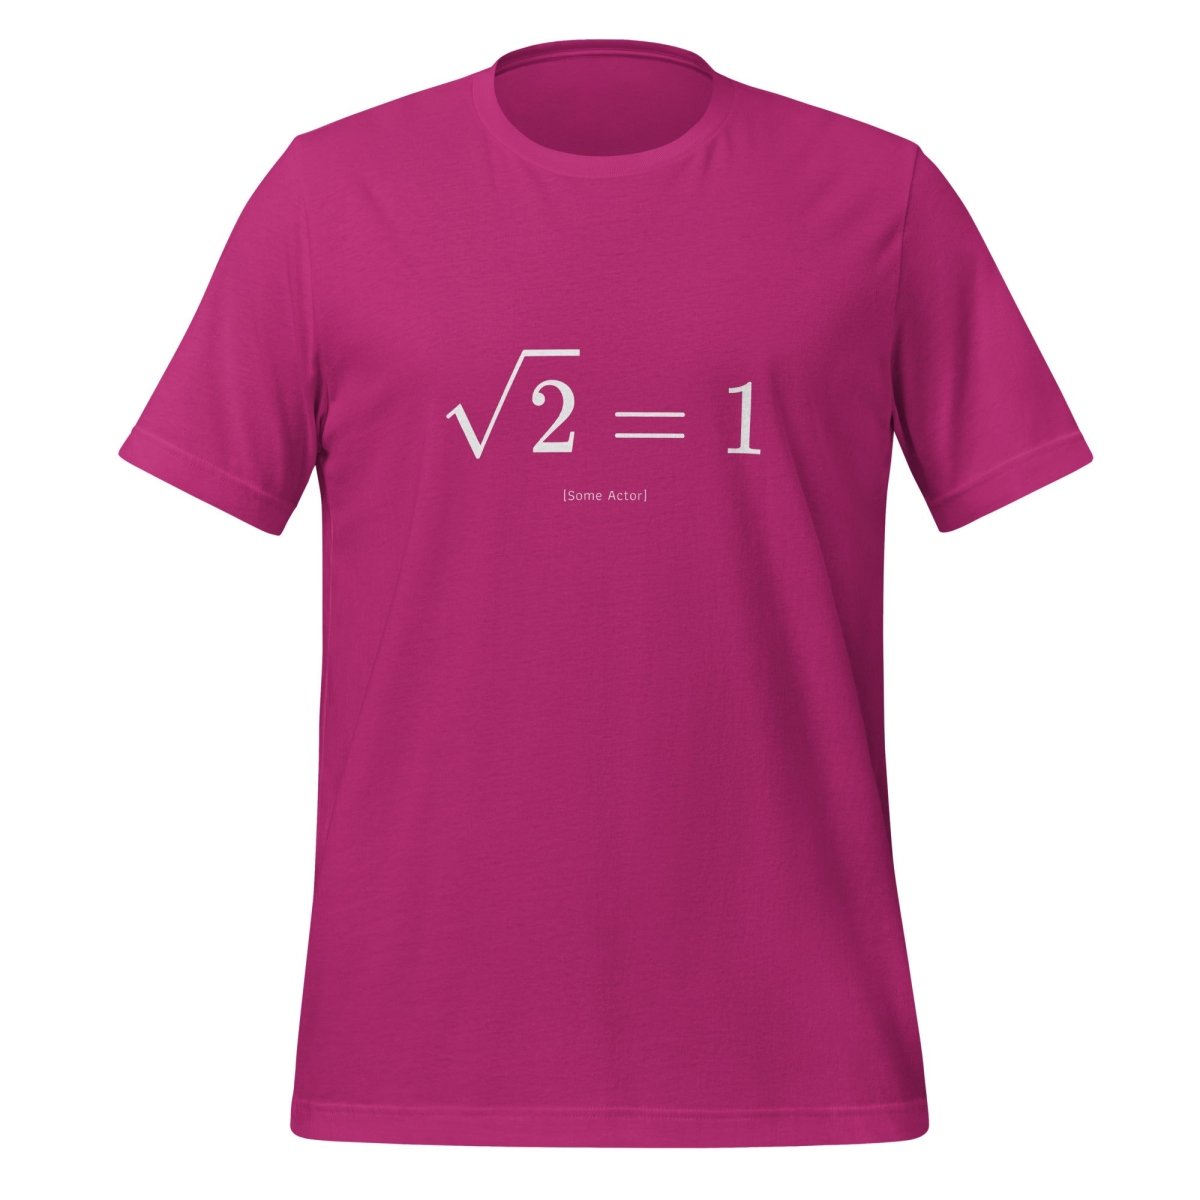 The Square Root of 2 Equals 1 T - Shirt (unisex) - Berry - AI Store